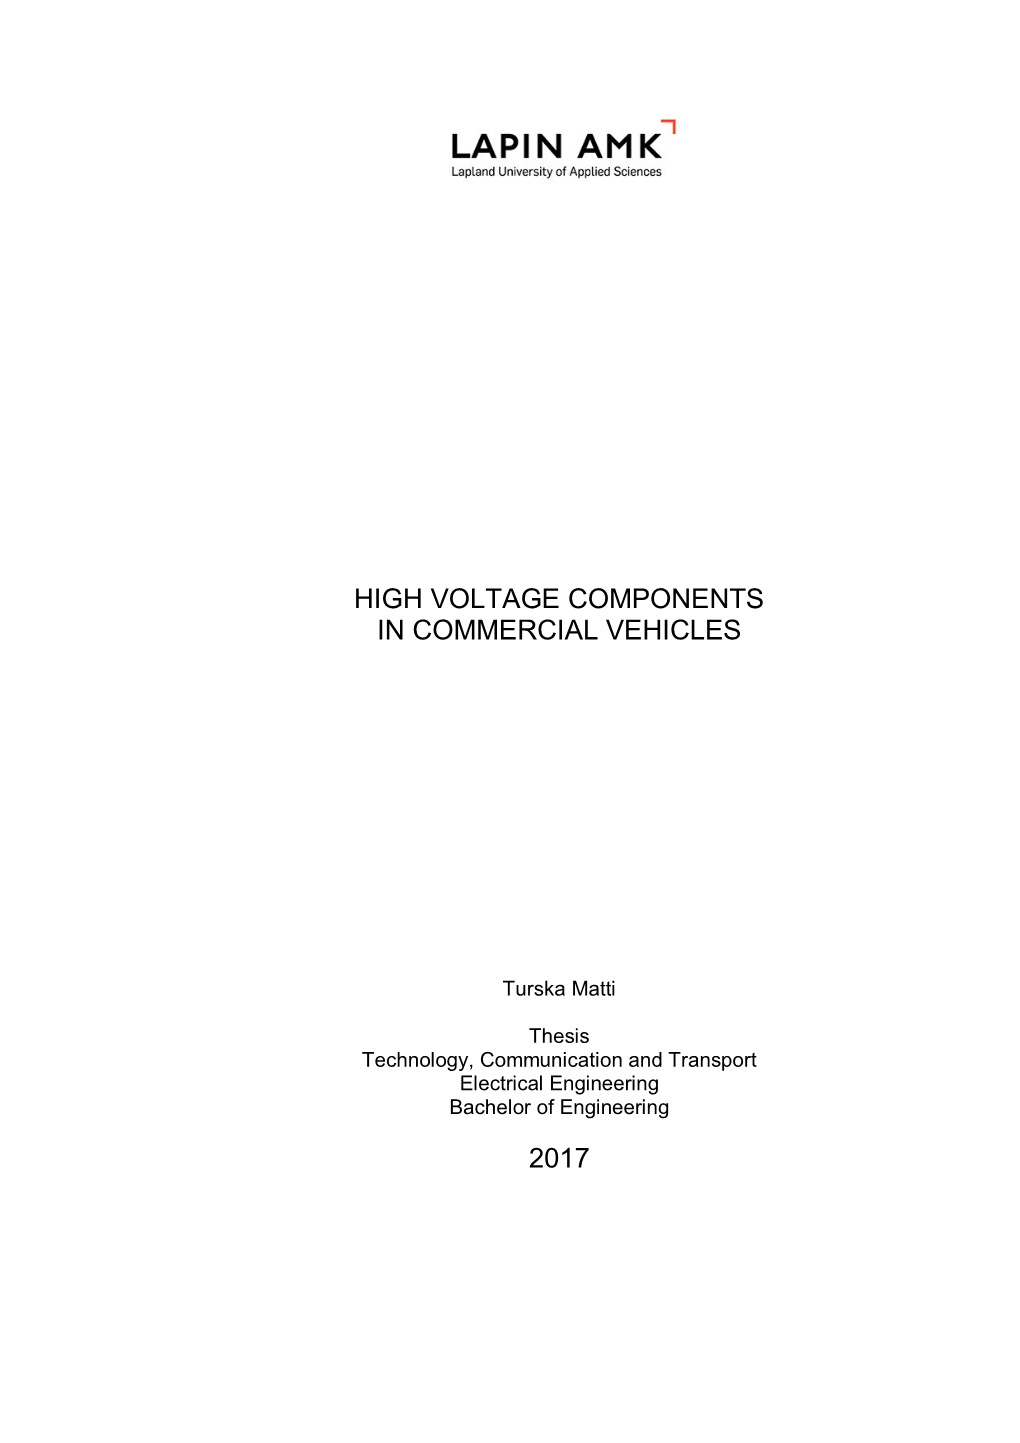 High Voltage Components in Commercial Vehicles